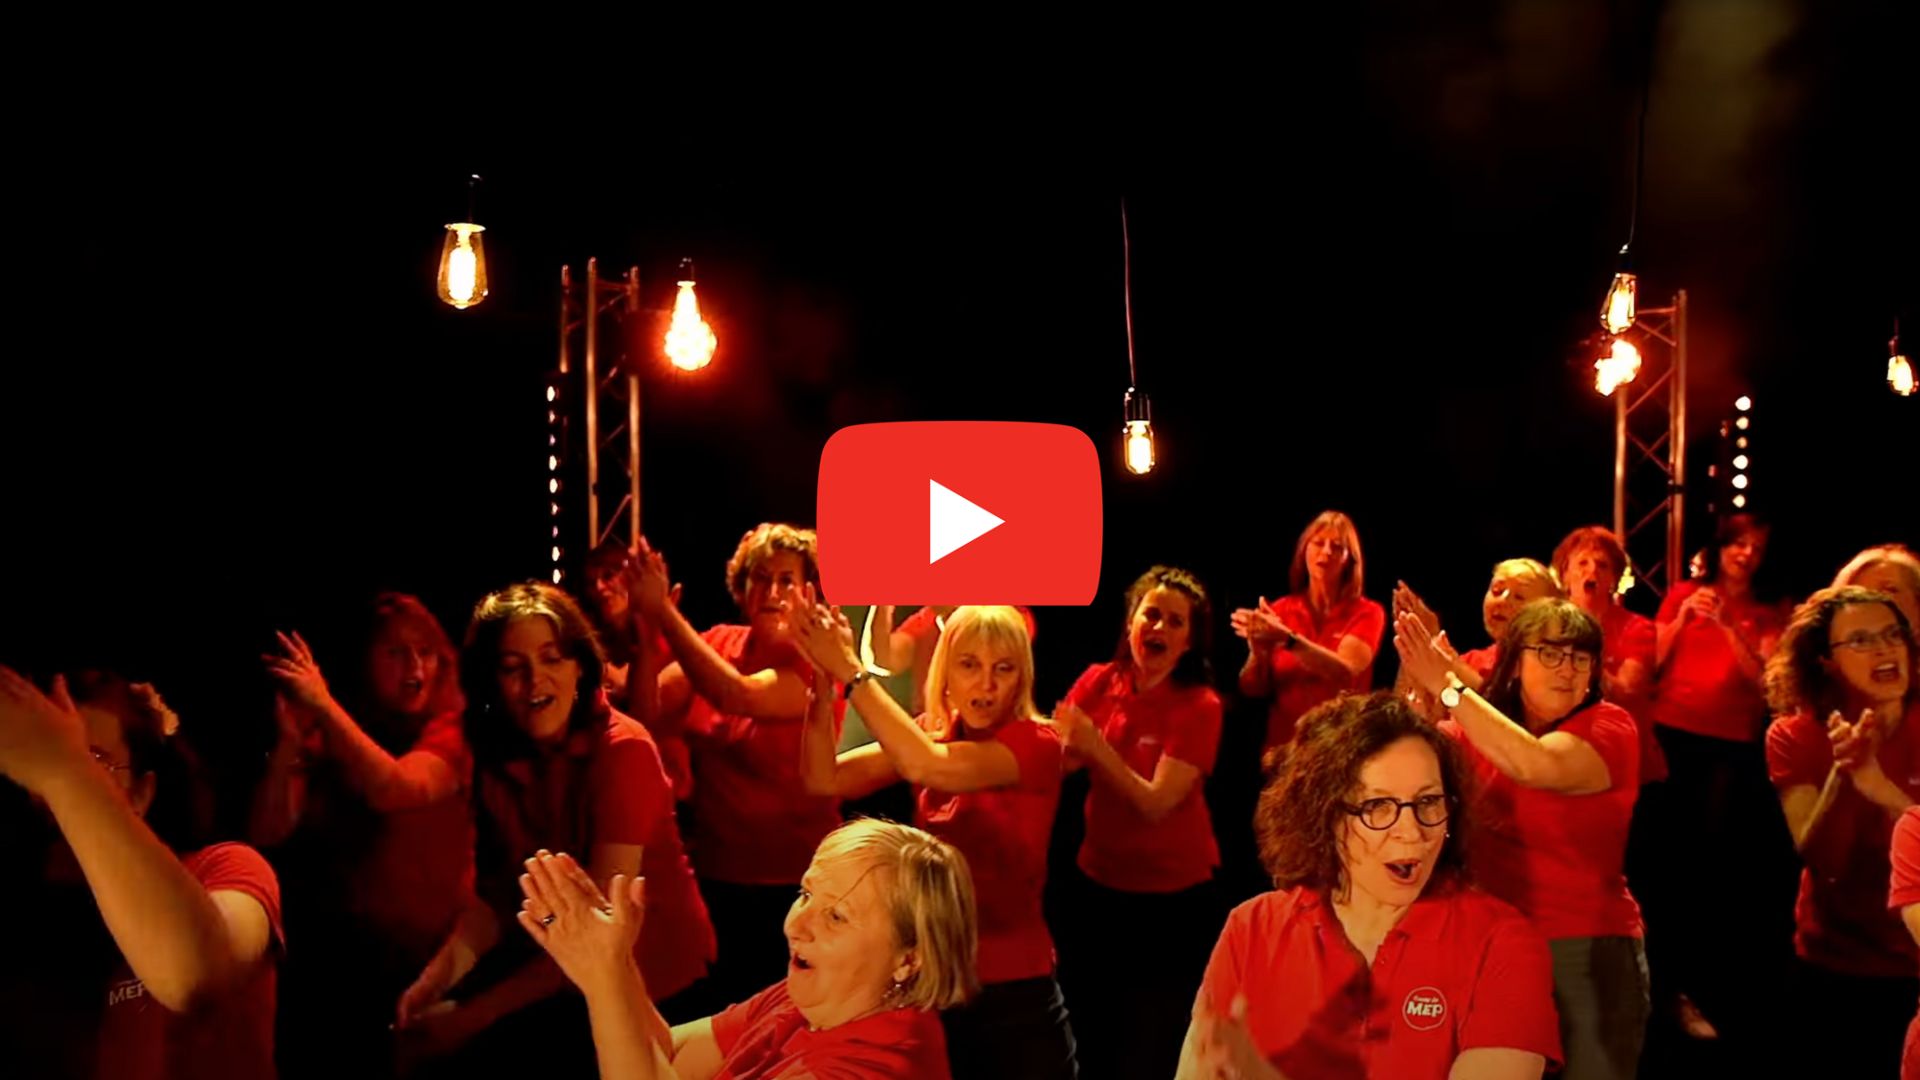 The MEP Women's Choir sings and dances in a performance of Sister Act's I Will Follow Him